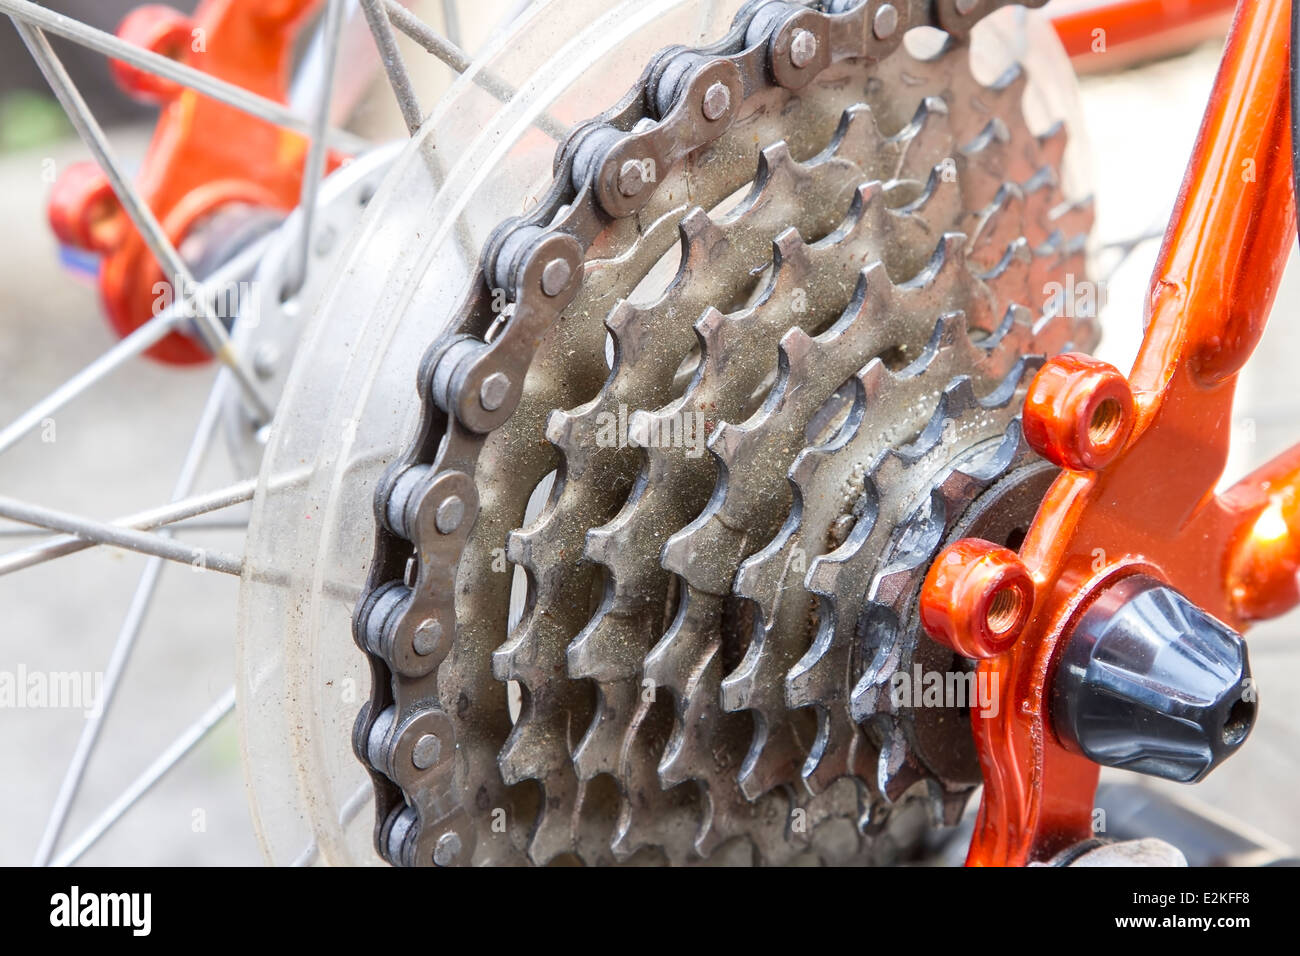 Bicycle rear gears with chain Stock Photo